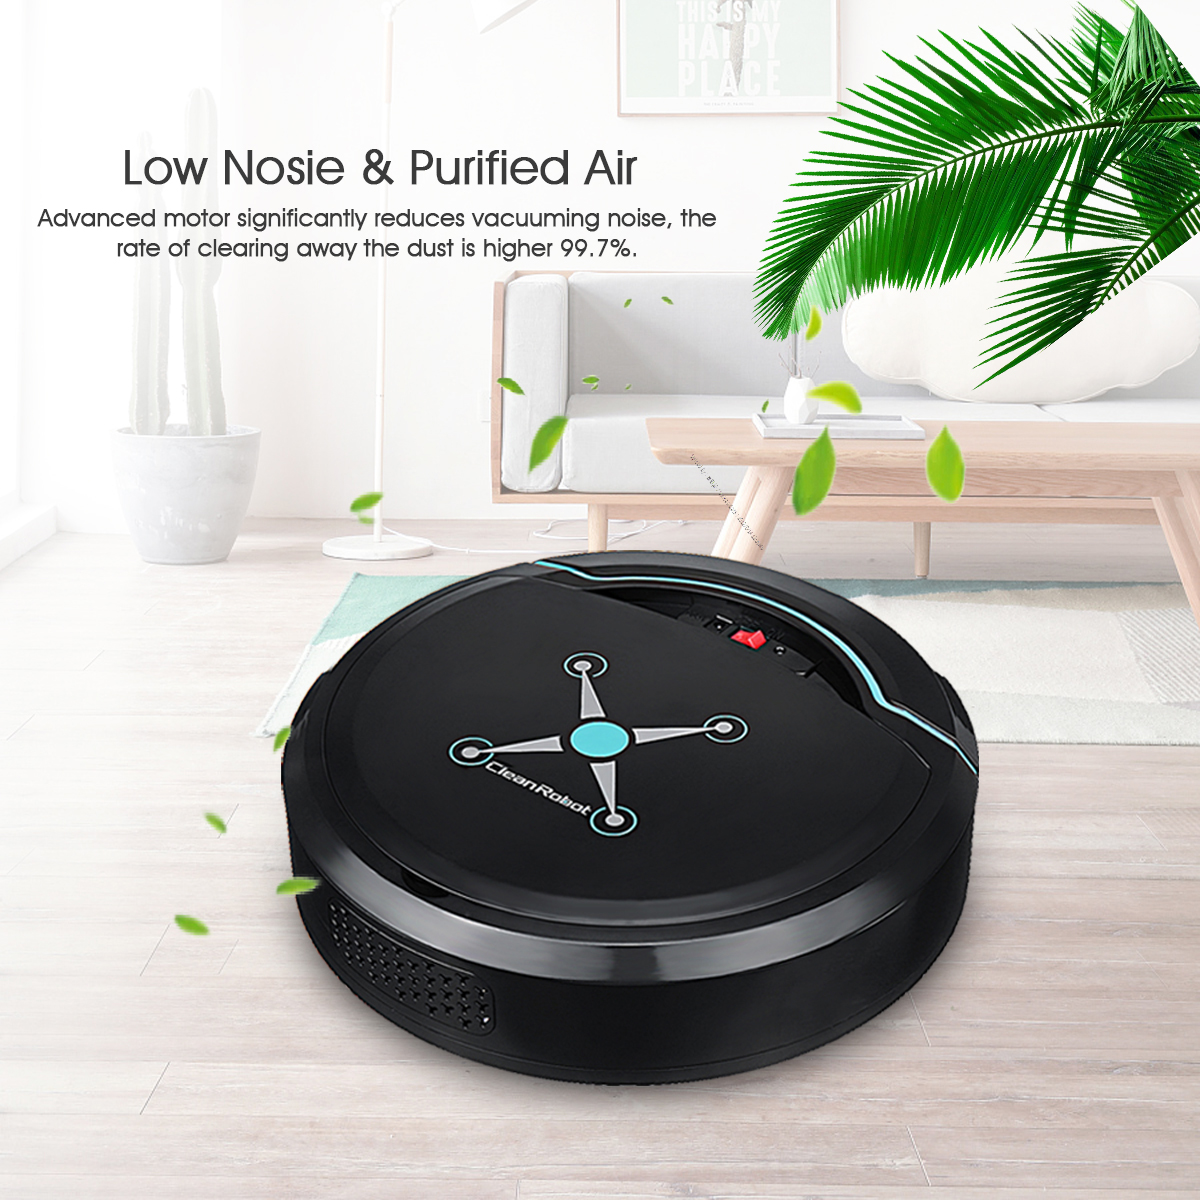 Holmark-Automatic-Mini-Smart-Robot-Vacuum-Cleaner-Floor-Dusting-Sweeping-Machine-with-USB-Charger-fo-1243824